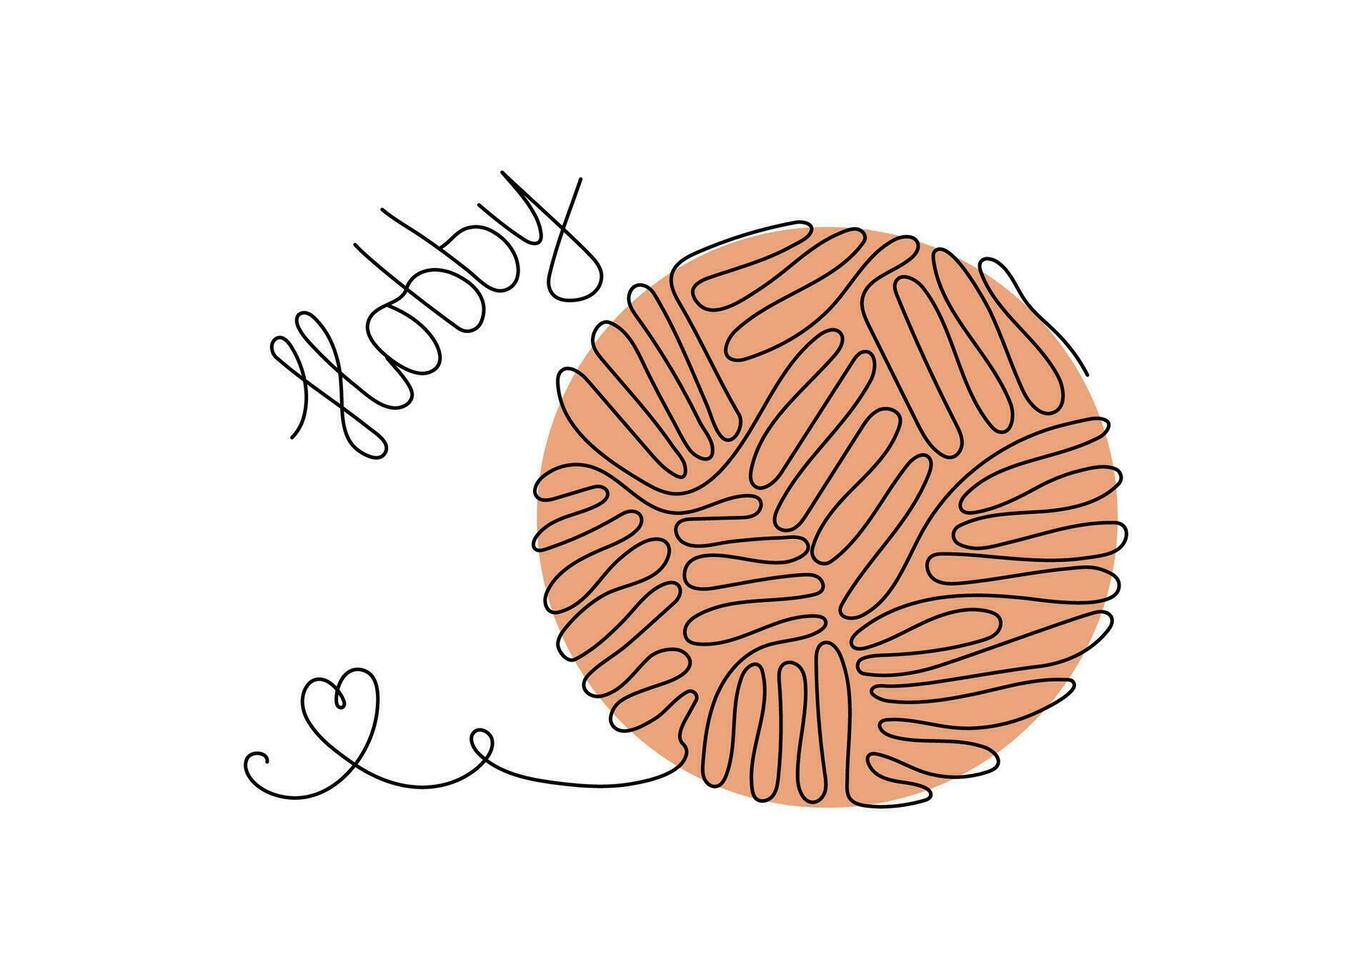 Yarn ball and knitting needles. Badge, icon, logo.  Hobby, handicraft, needlework. Lettering, calligraphy. Line art, outline drawing.  Vector graphics, isolated background.